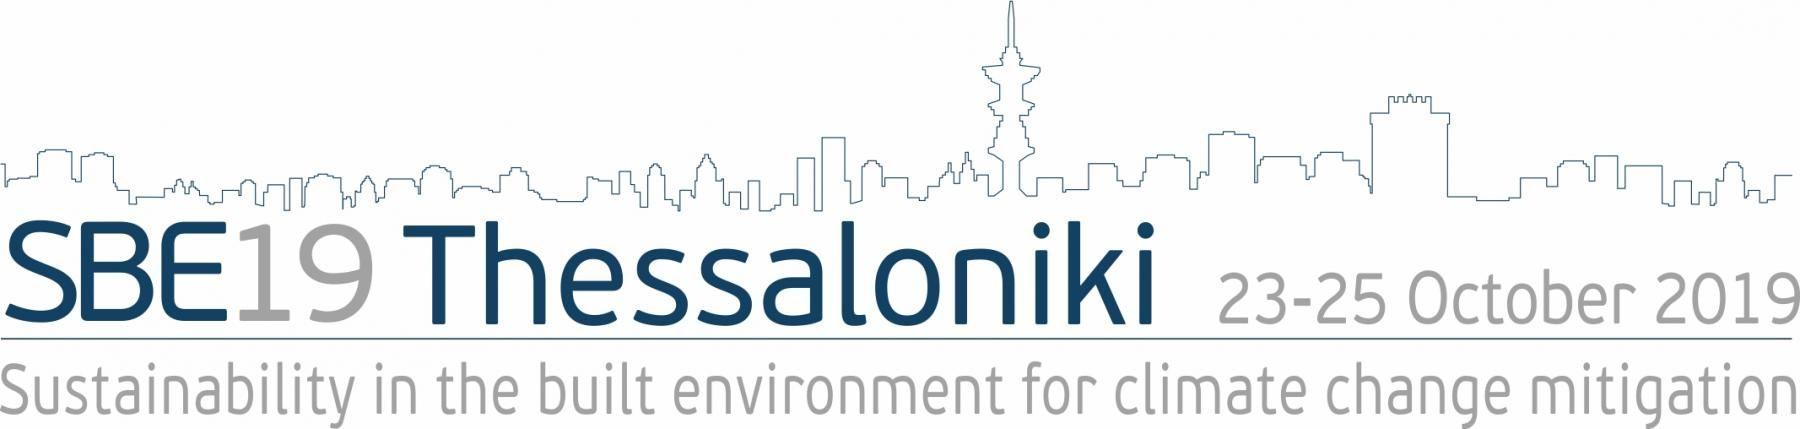 Environment Email Logo - SBE19 Thessaloniki • Sustainability in the built environment for ...